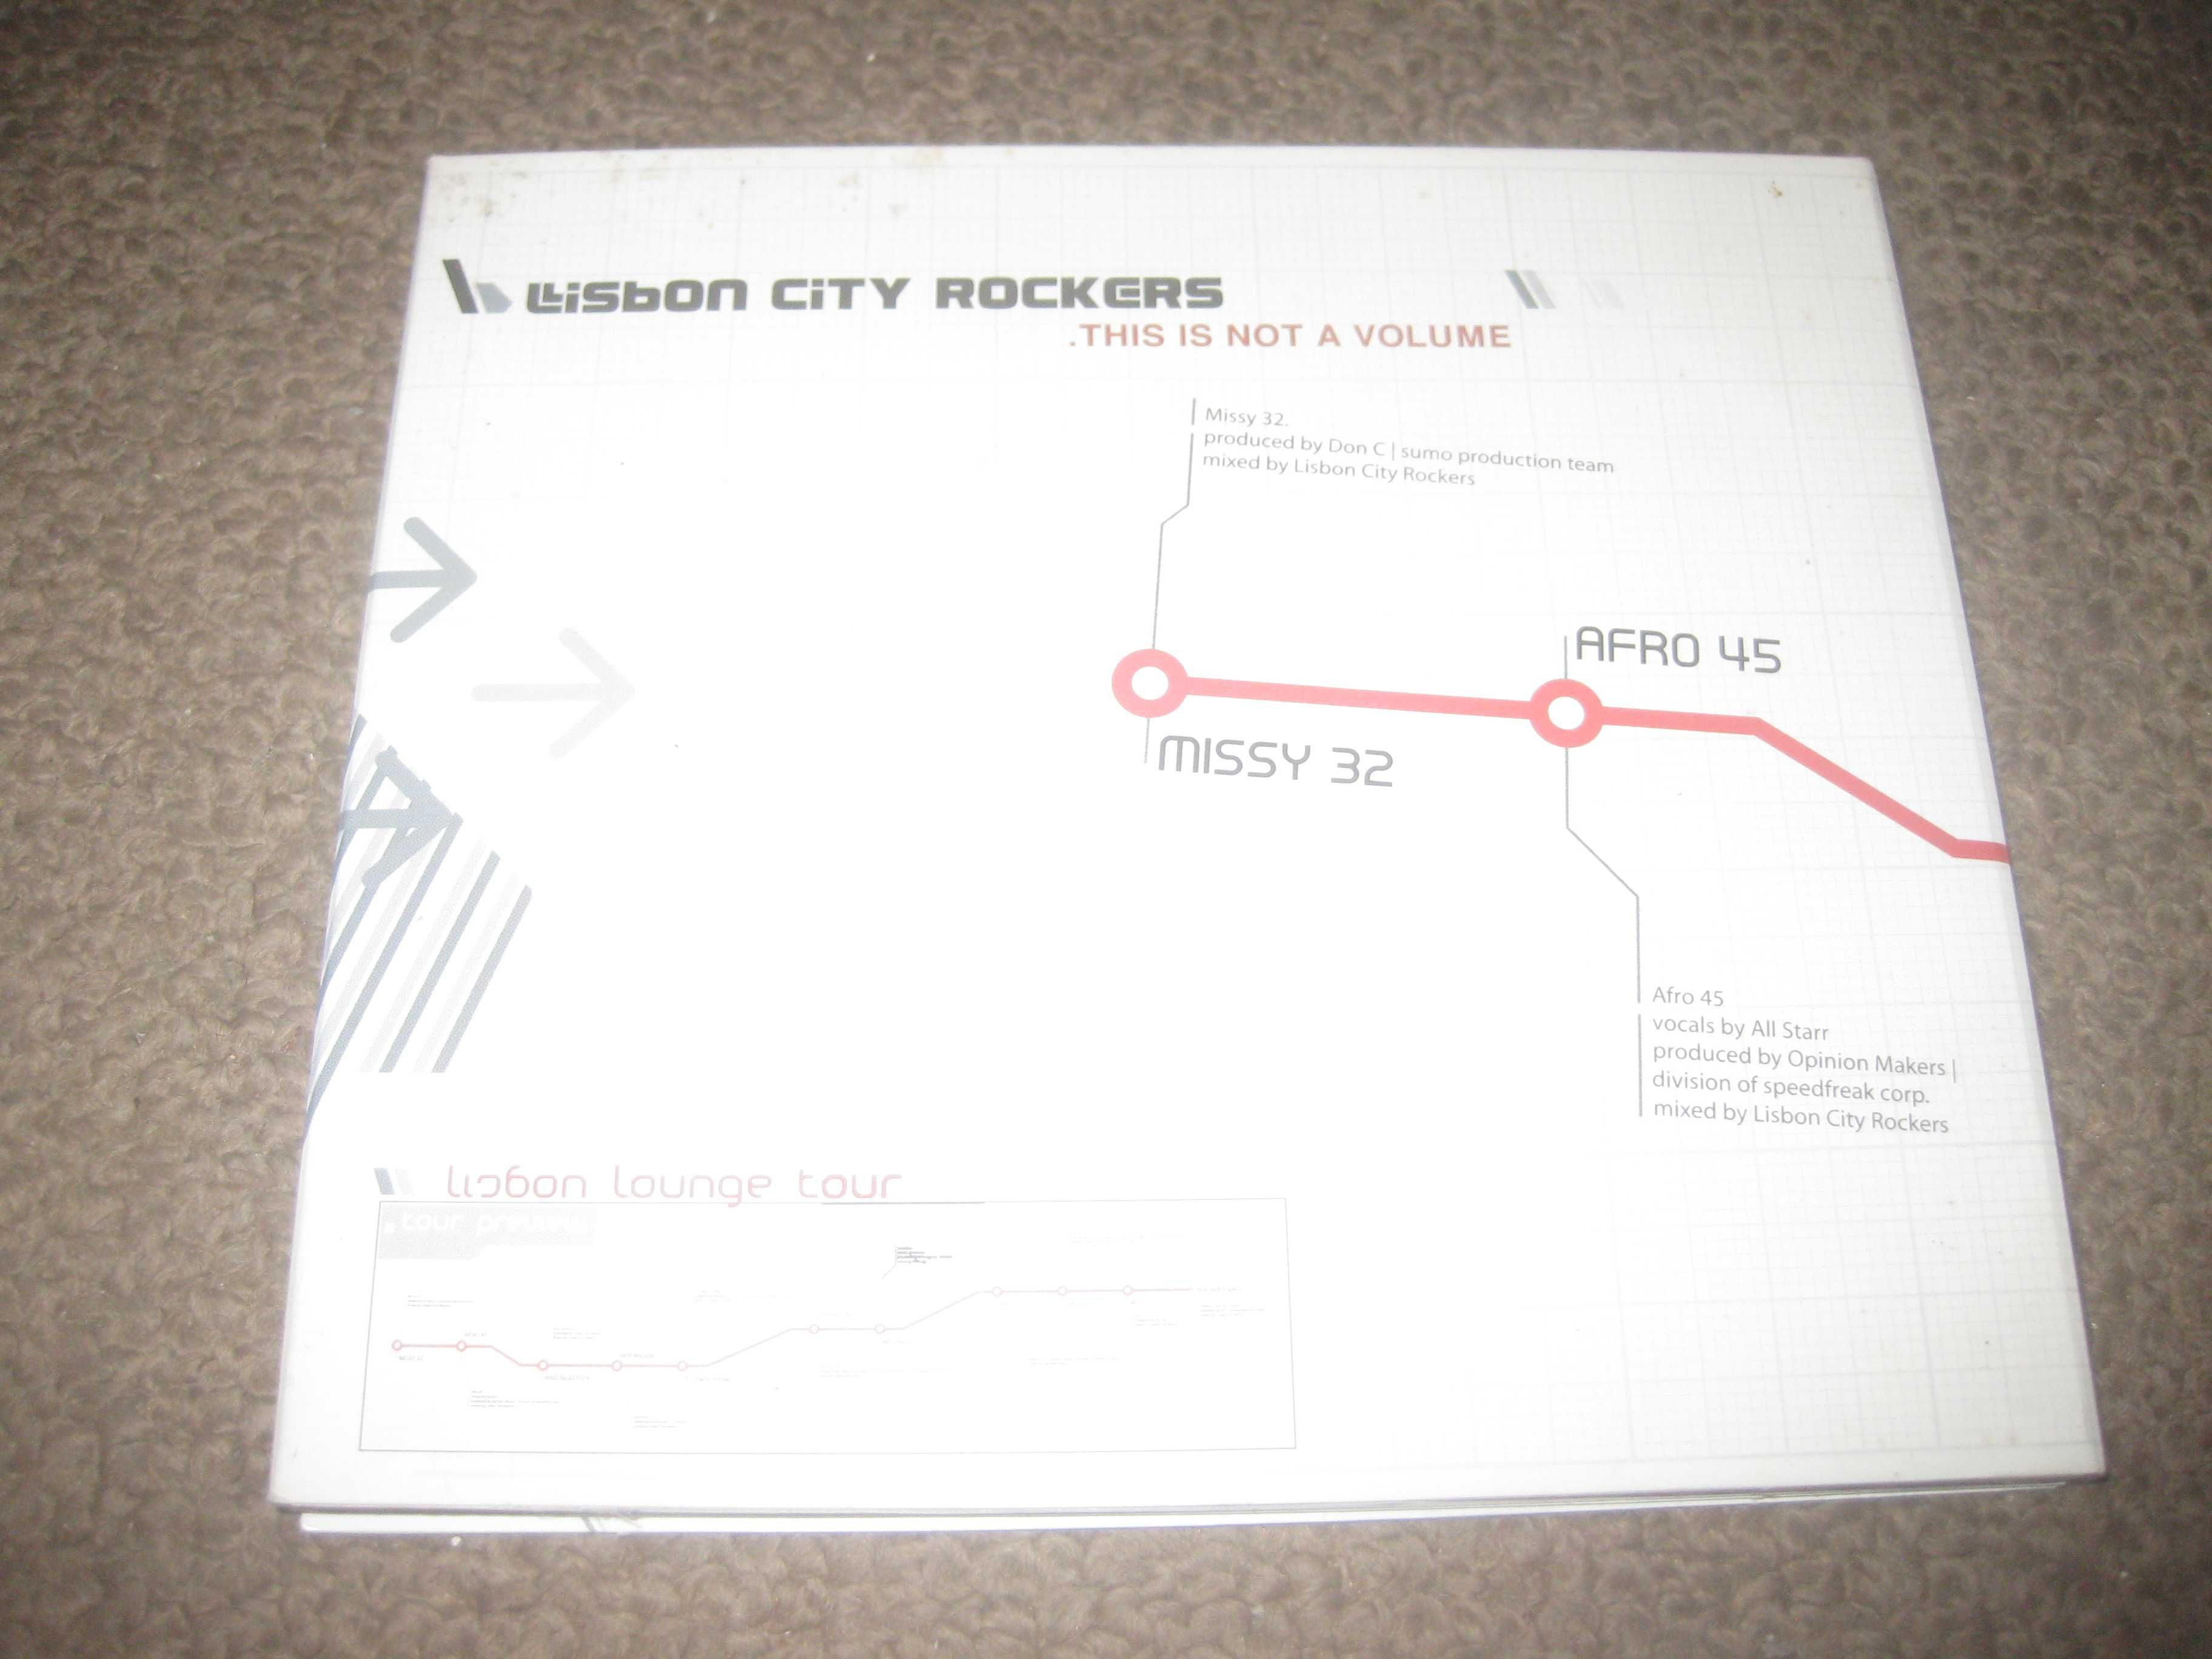 CD dos Lisbon City Rockers "This Is Not A Volume" Digipack!